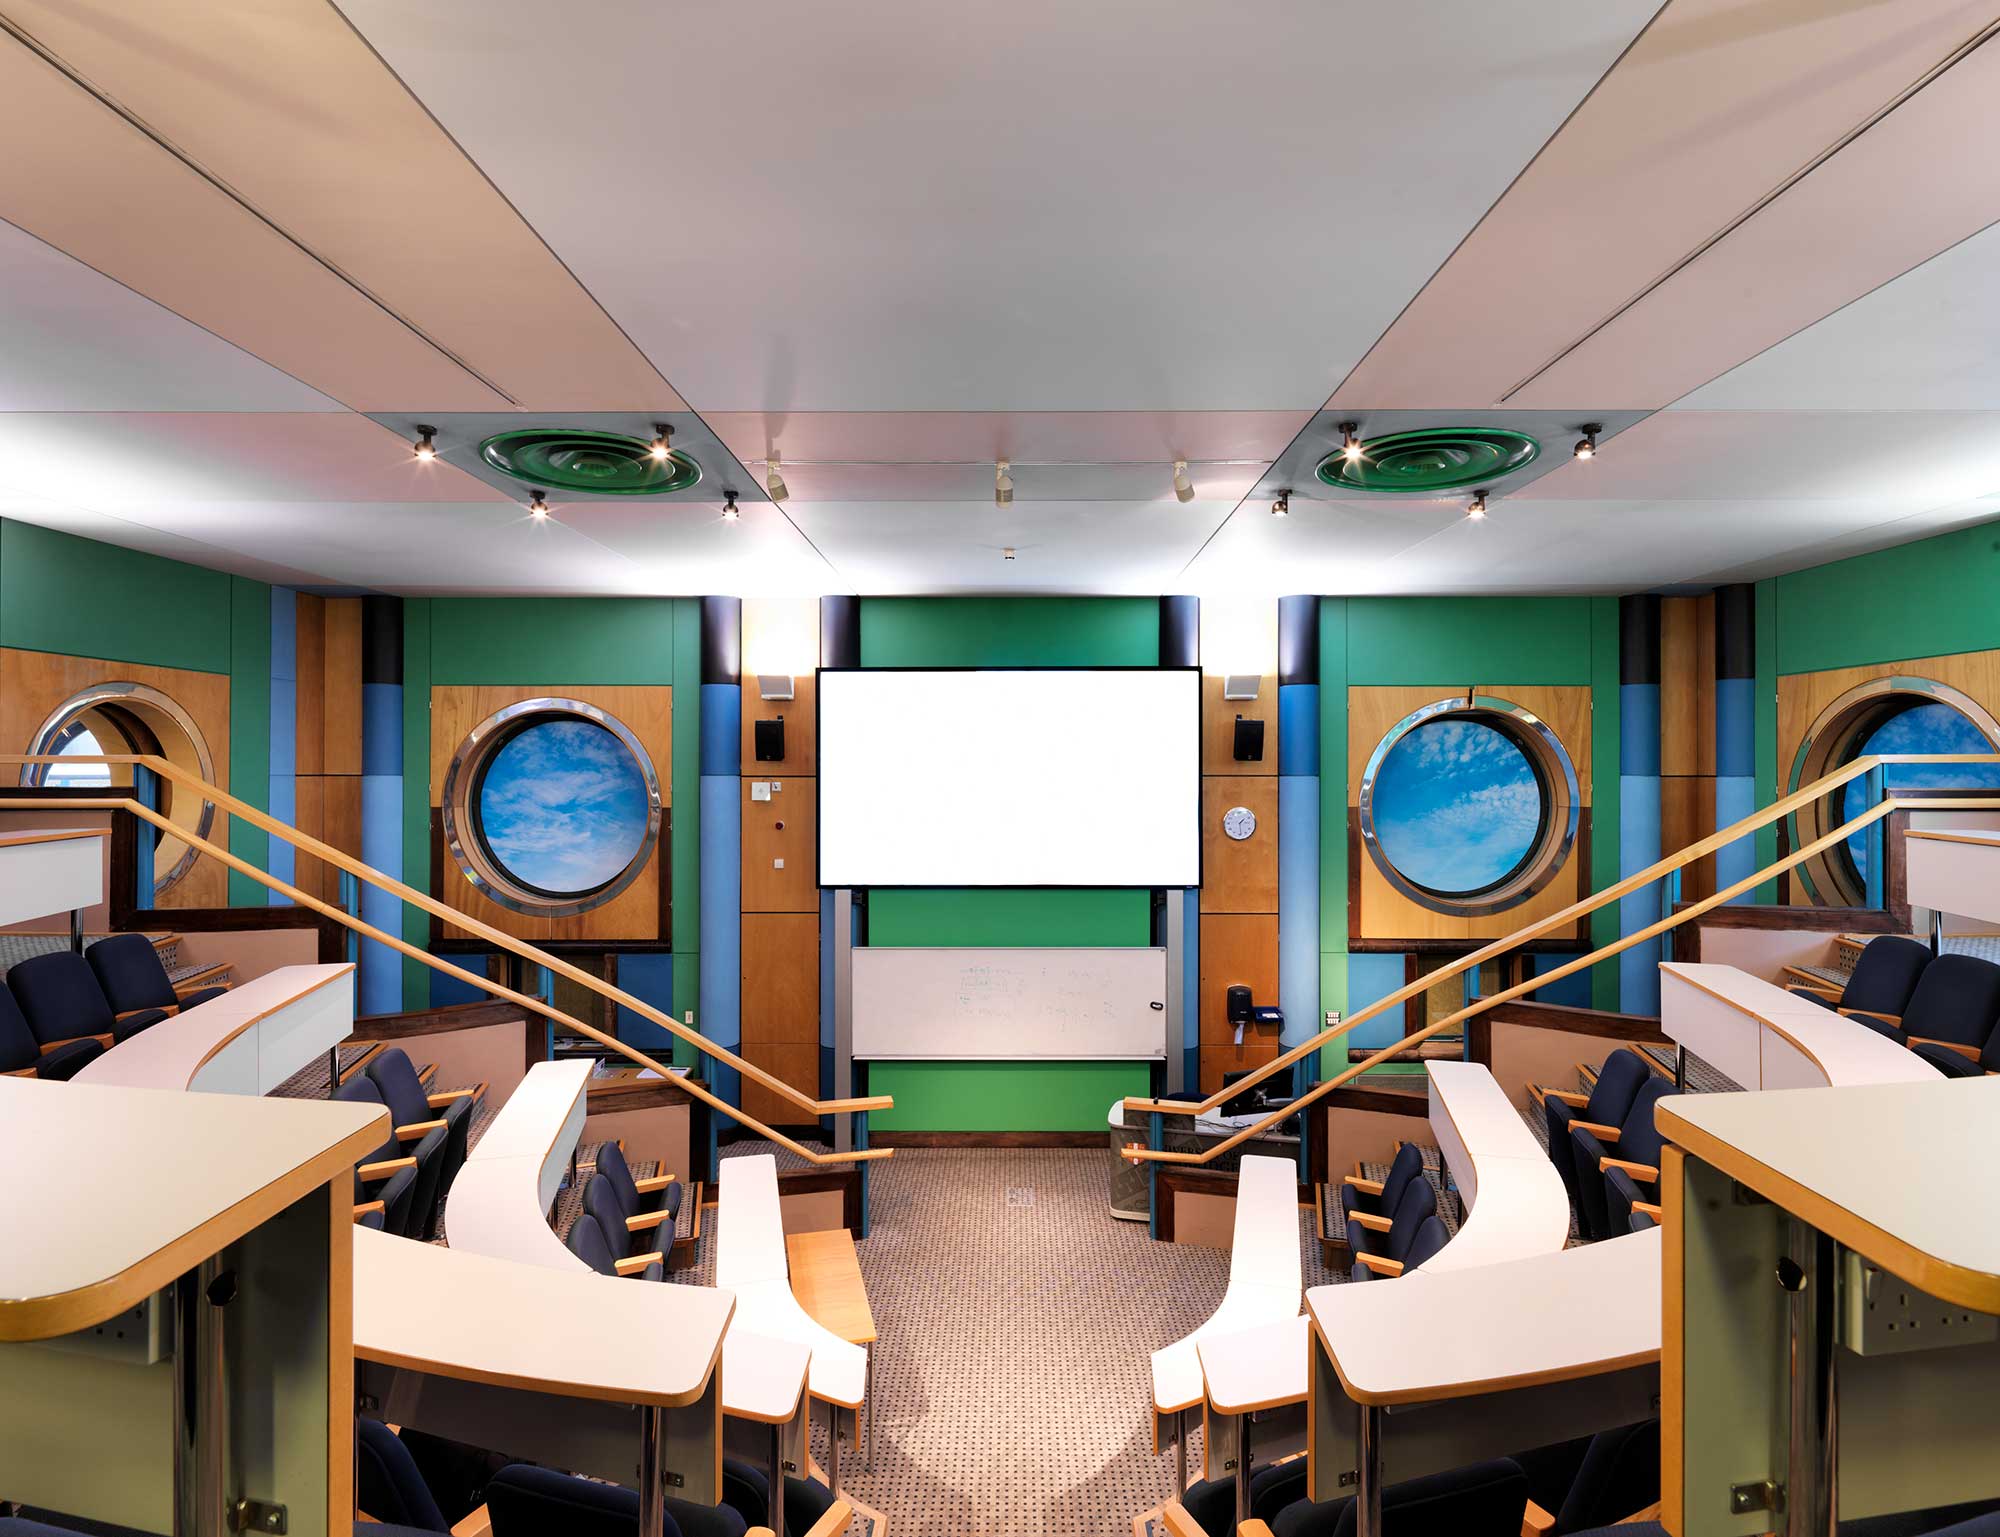 Modern lecture theatre with porthole style windows